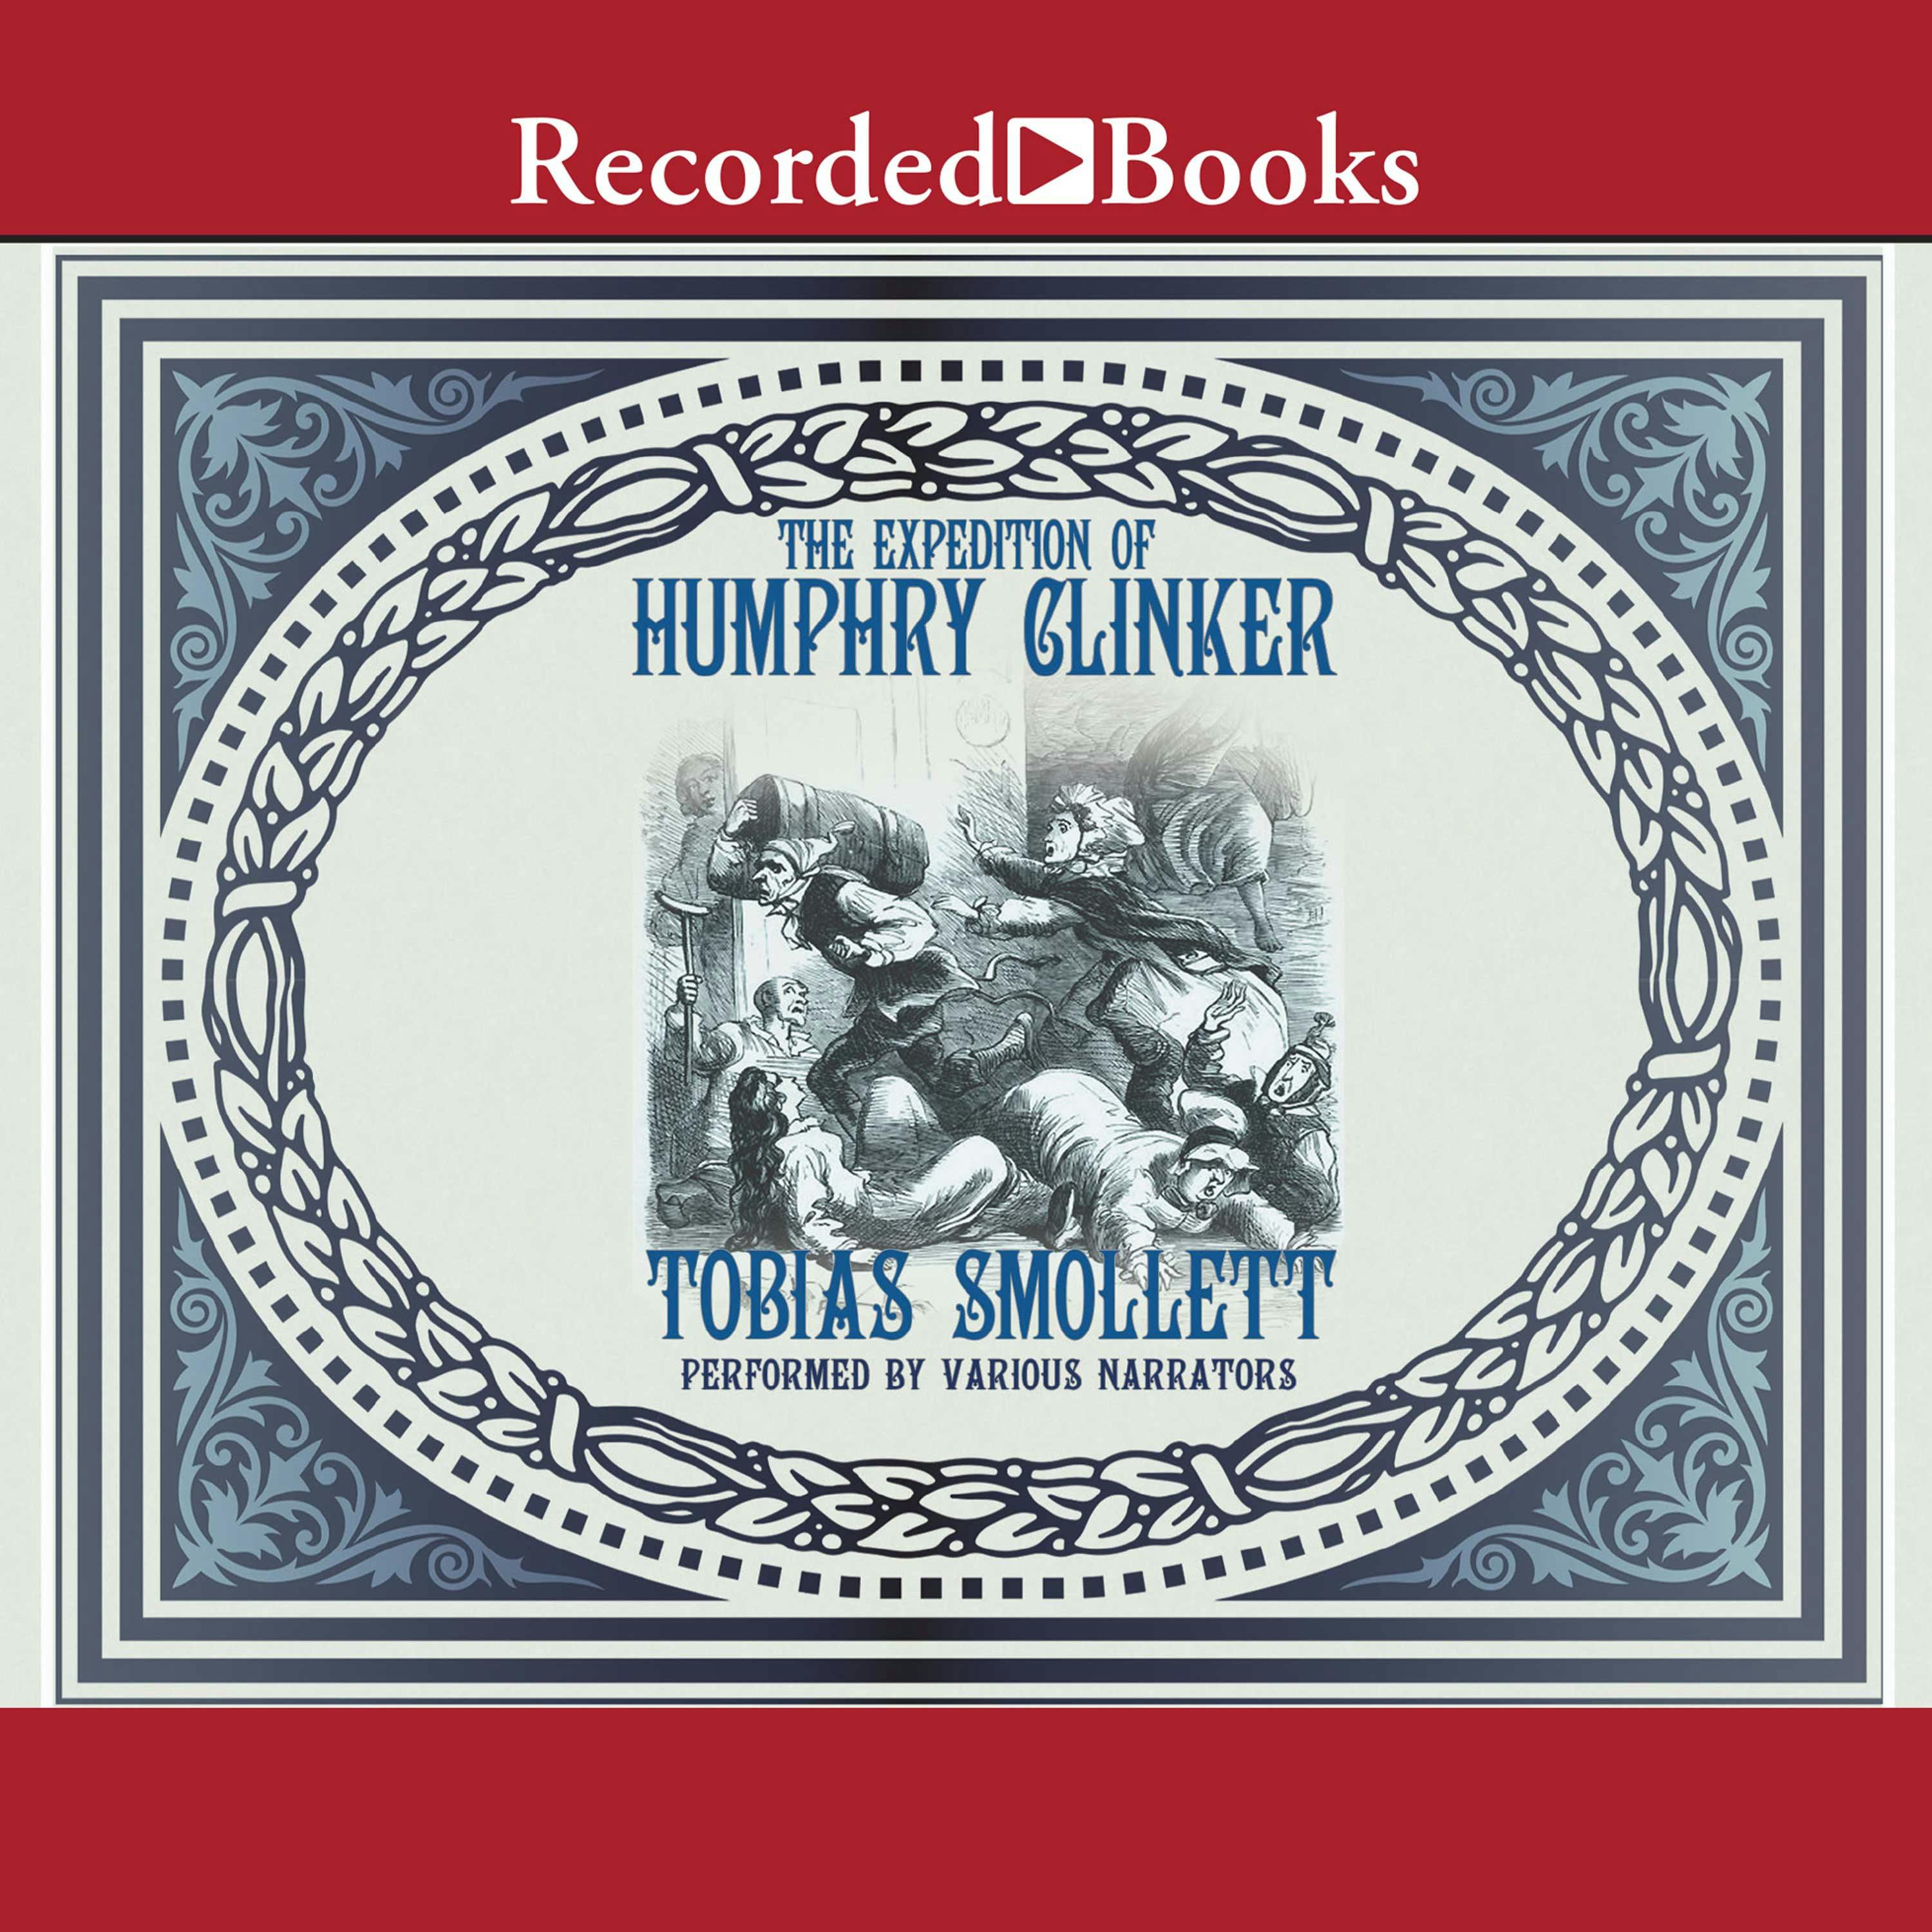 Humphry Clinker - undefined